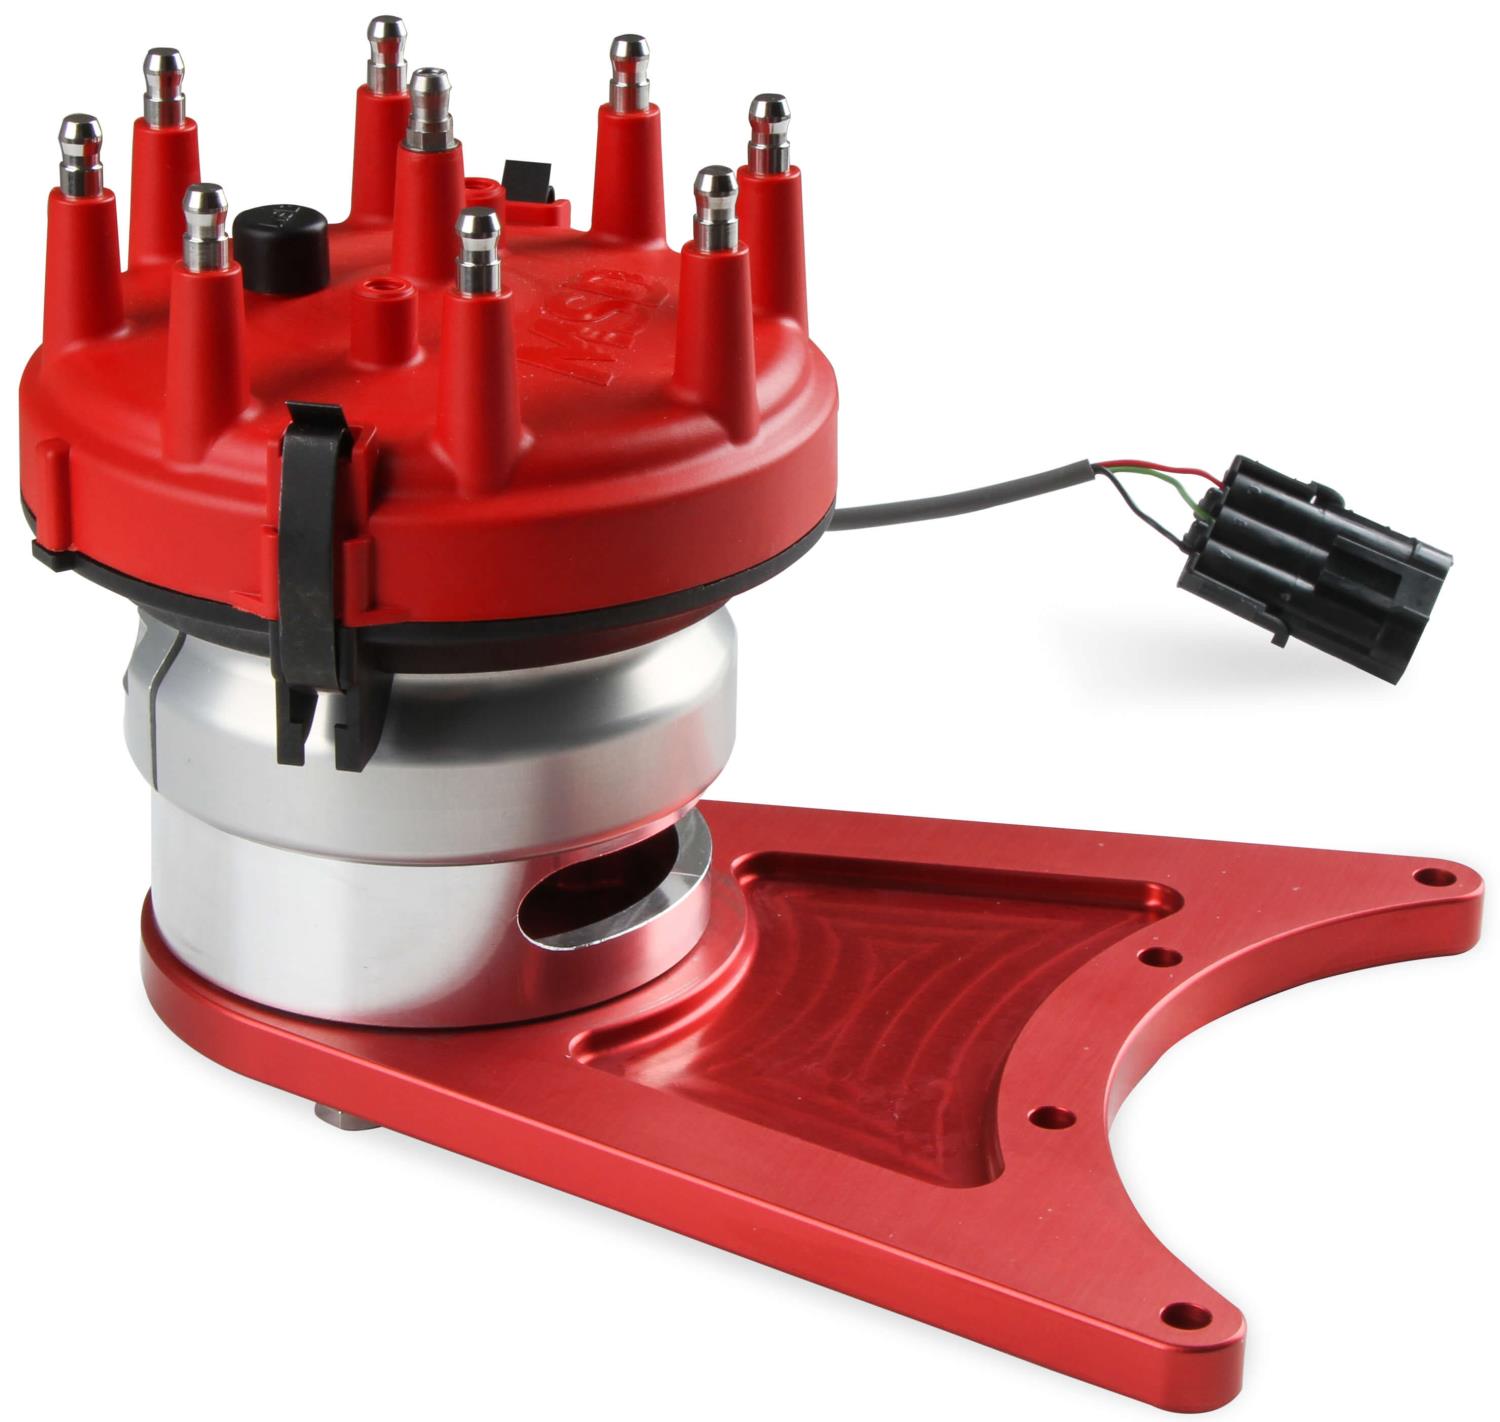 Pro-Billet Front Drive Distributor w/Adjustable Hall-Effect Sync Pickup for Small Block Chevy - Red HEI Cap